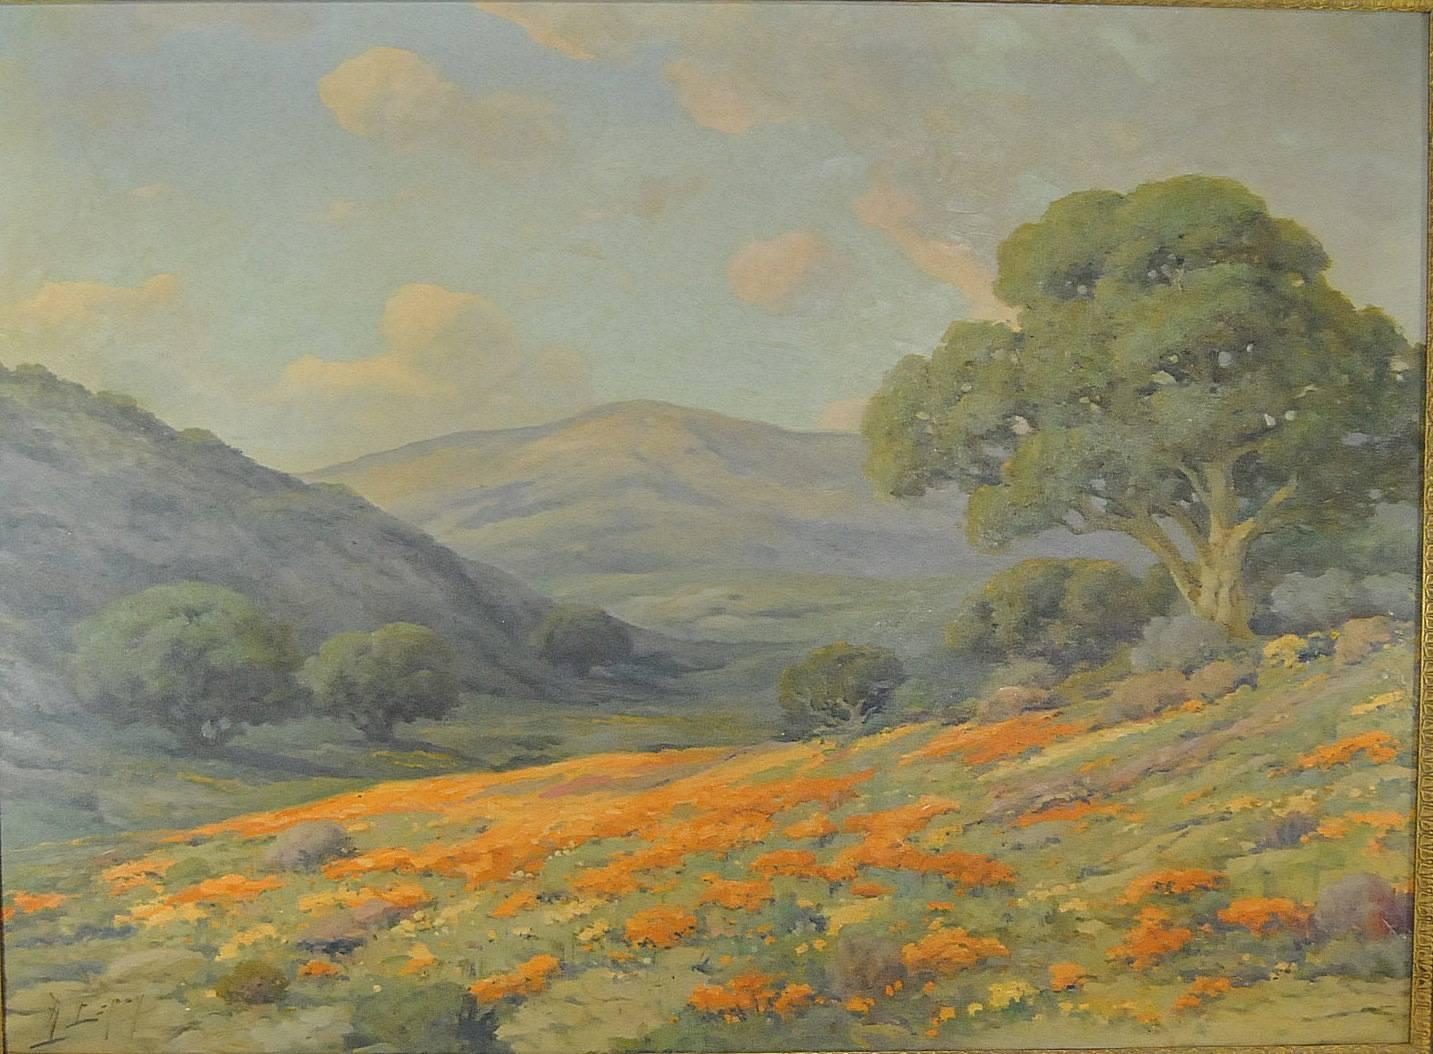 A beautiful rendition of poppies from the rolling hills of Bakersfield, CA by Angel Espoy, 1879-1963. Signed on the lower left corner and a copyright on the back. The image size is 37" x 27" and with the frame it is 44" x